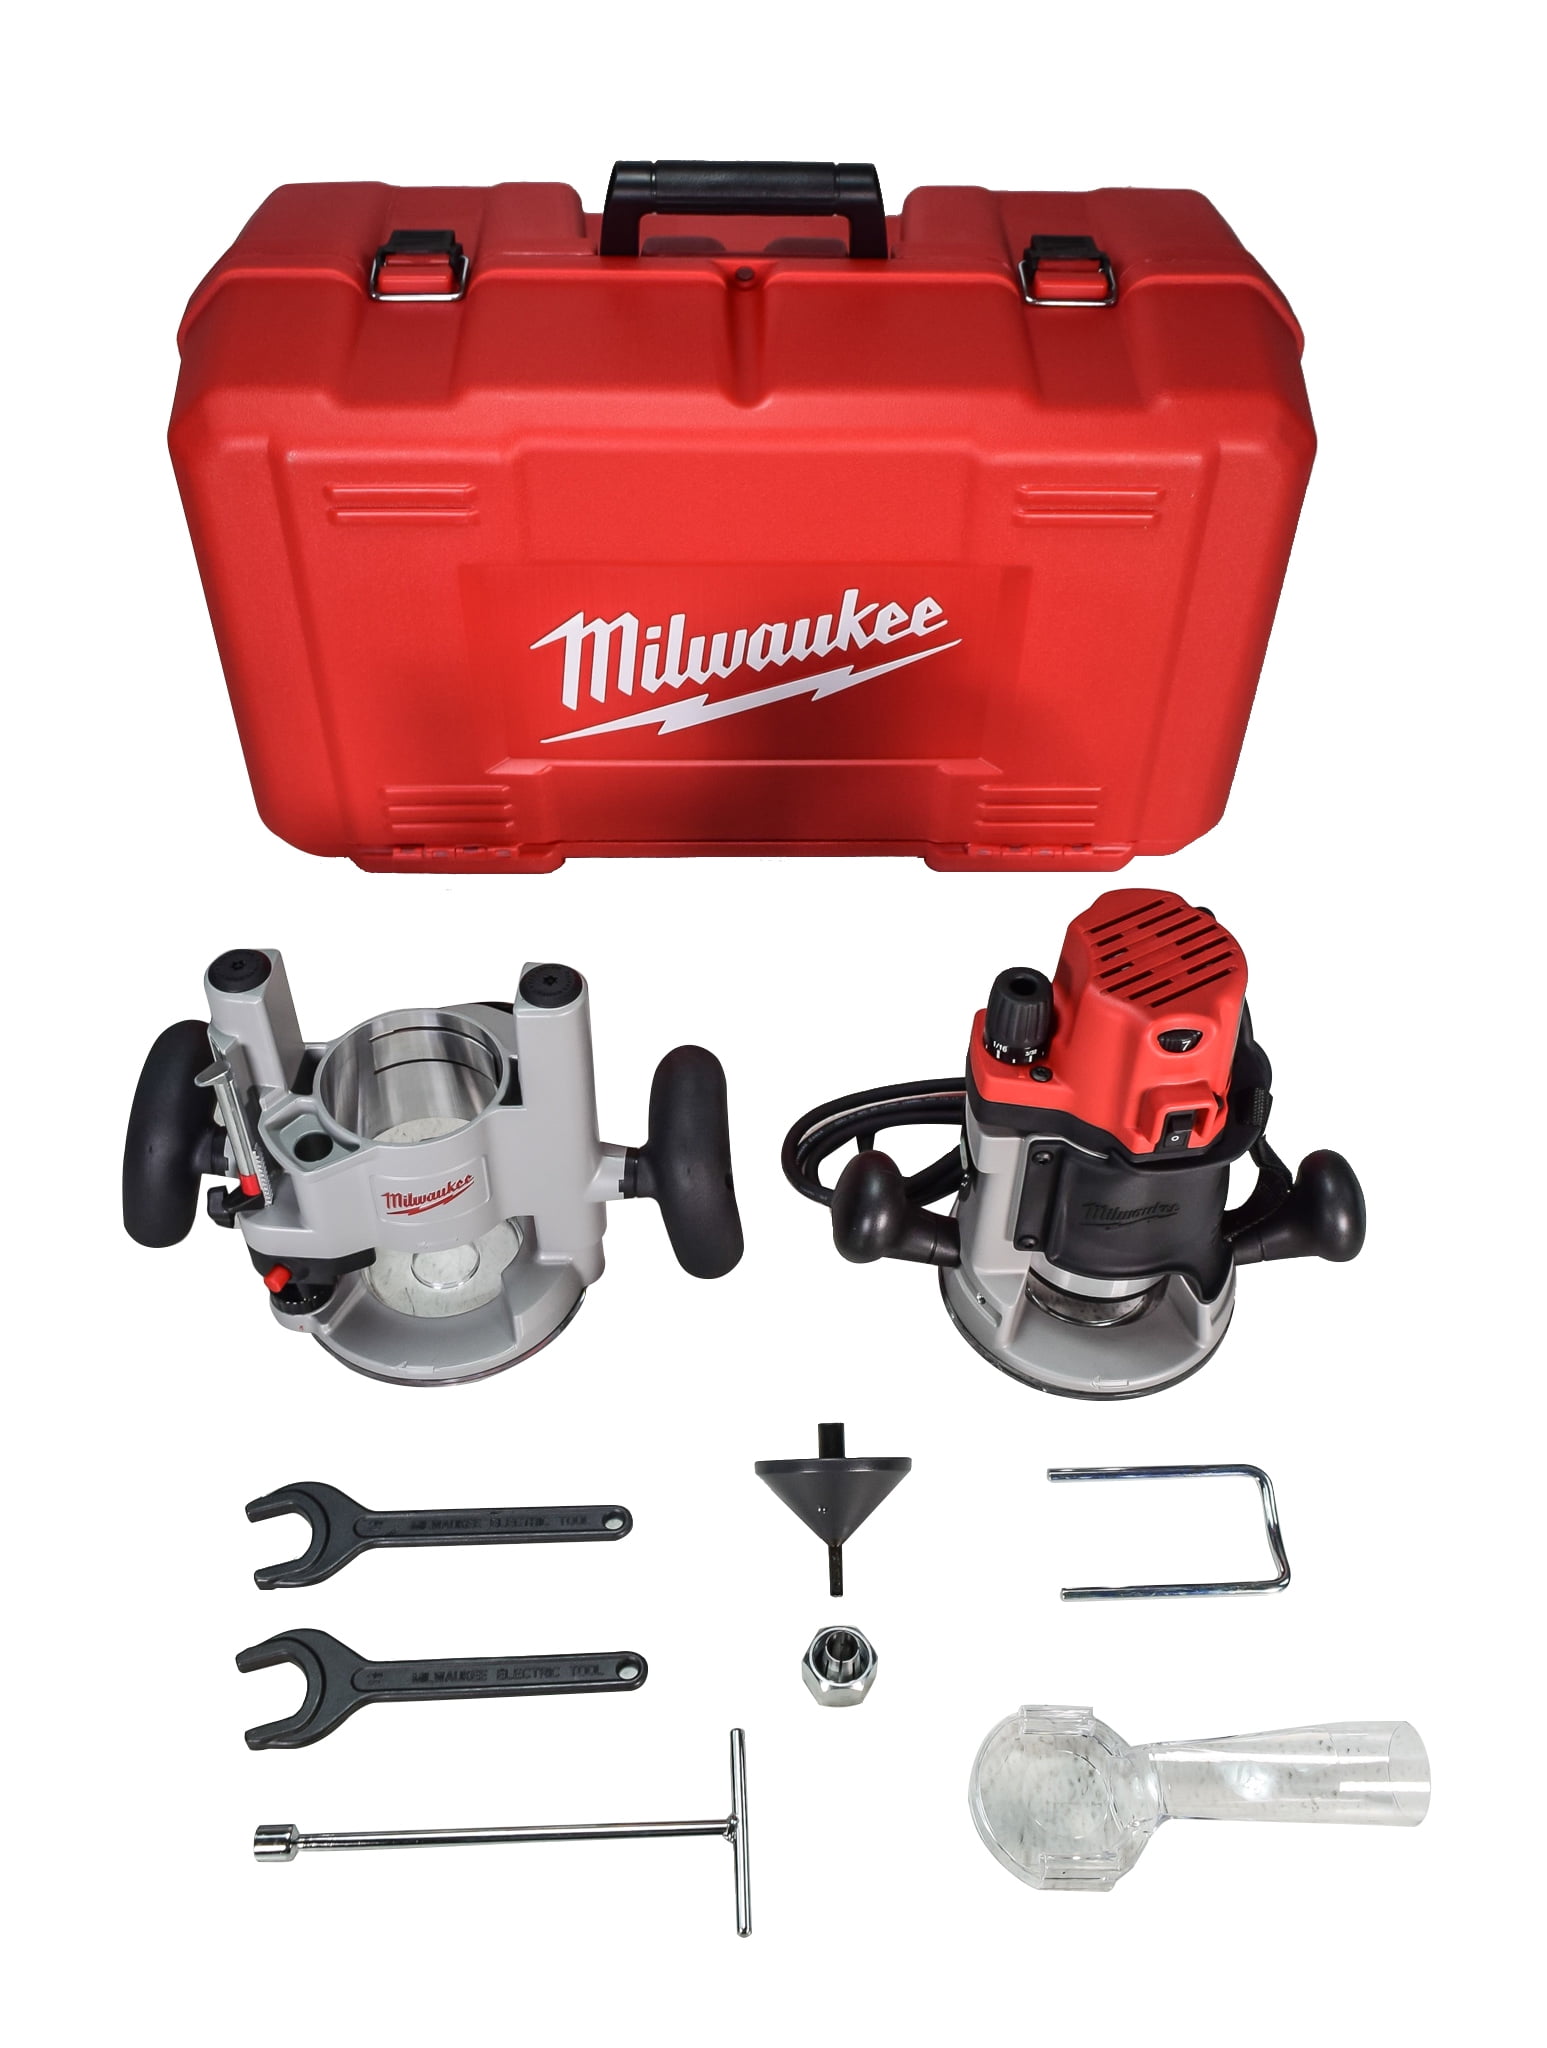 Milwaukee 5616-24 2-1/4 Max-Horsepower EVS Multi-Base Router Kit Includes  Plunge Base and BodyGrip Fixed Base by Milwaukee Electric Tool並行輸入品 